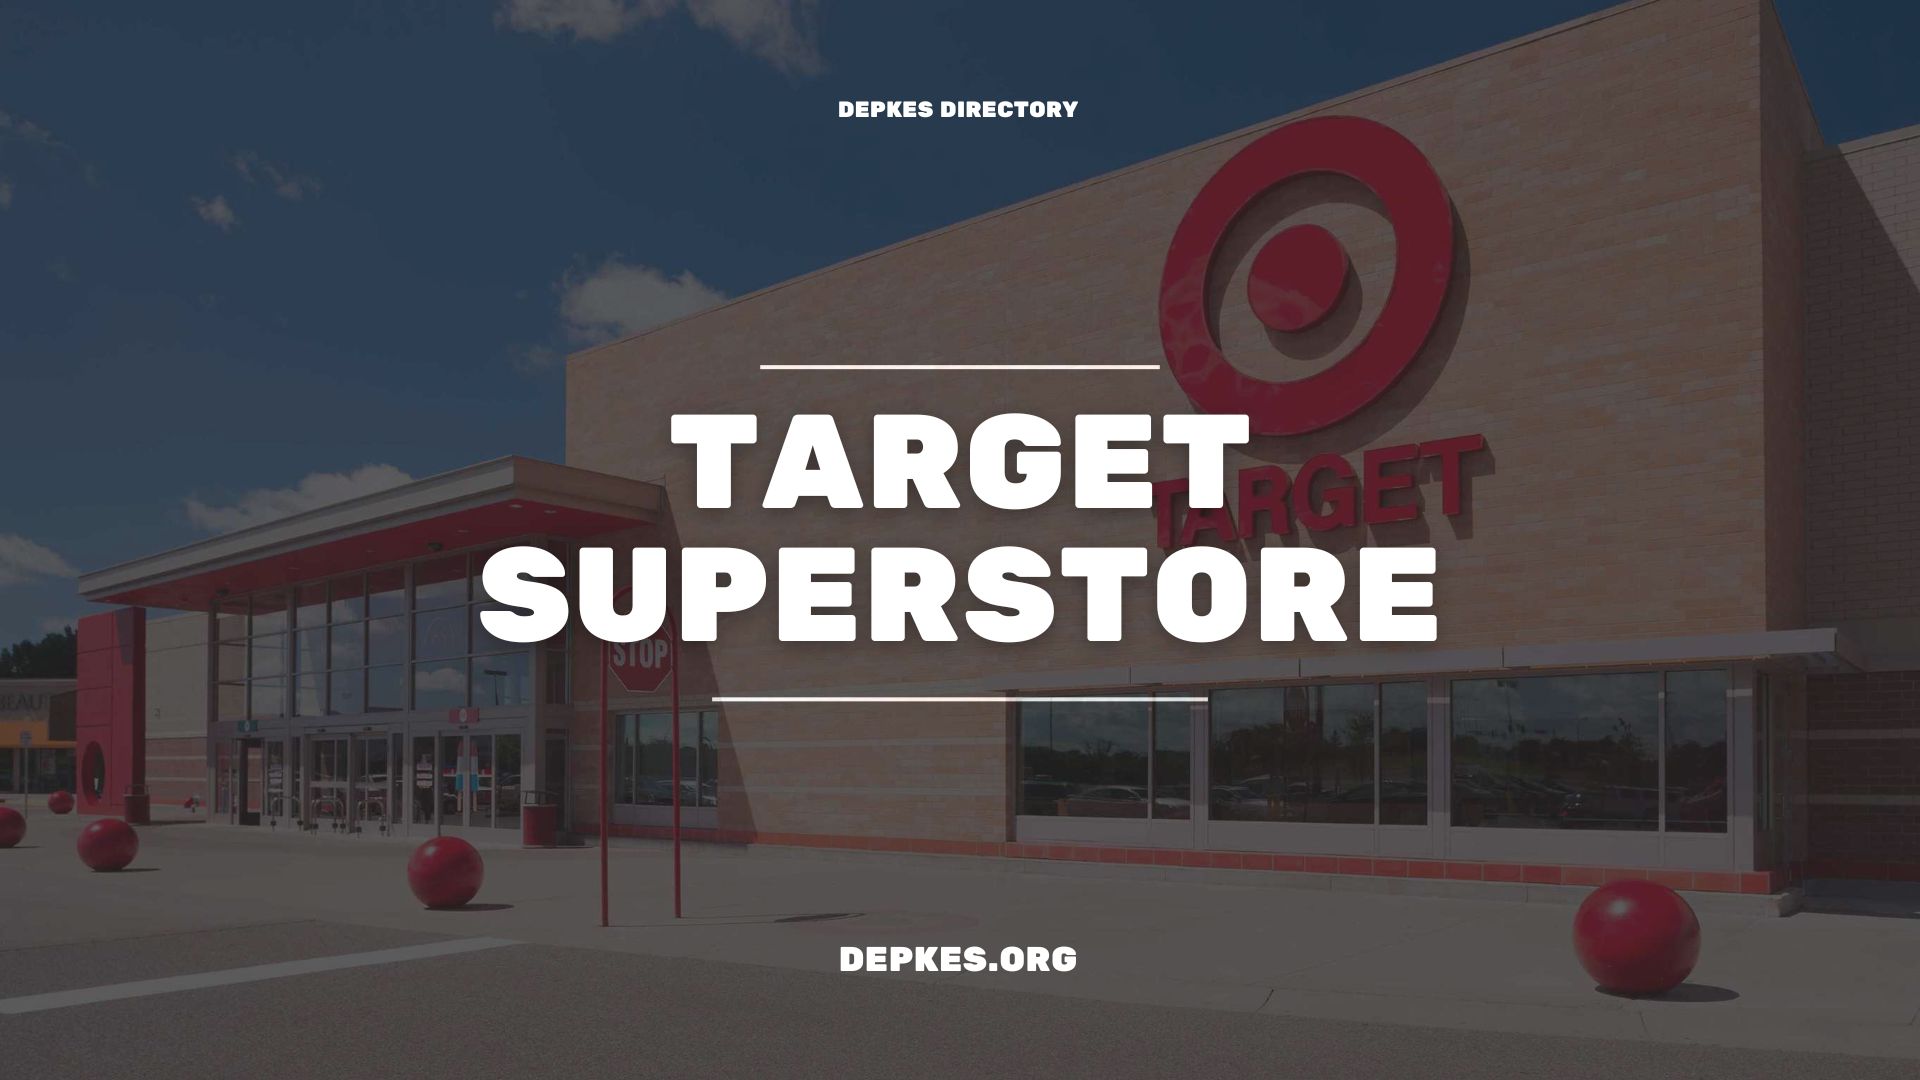 Top 10 Largest Target Superstore in the United States